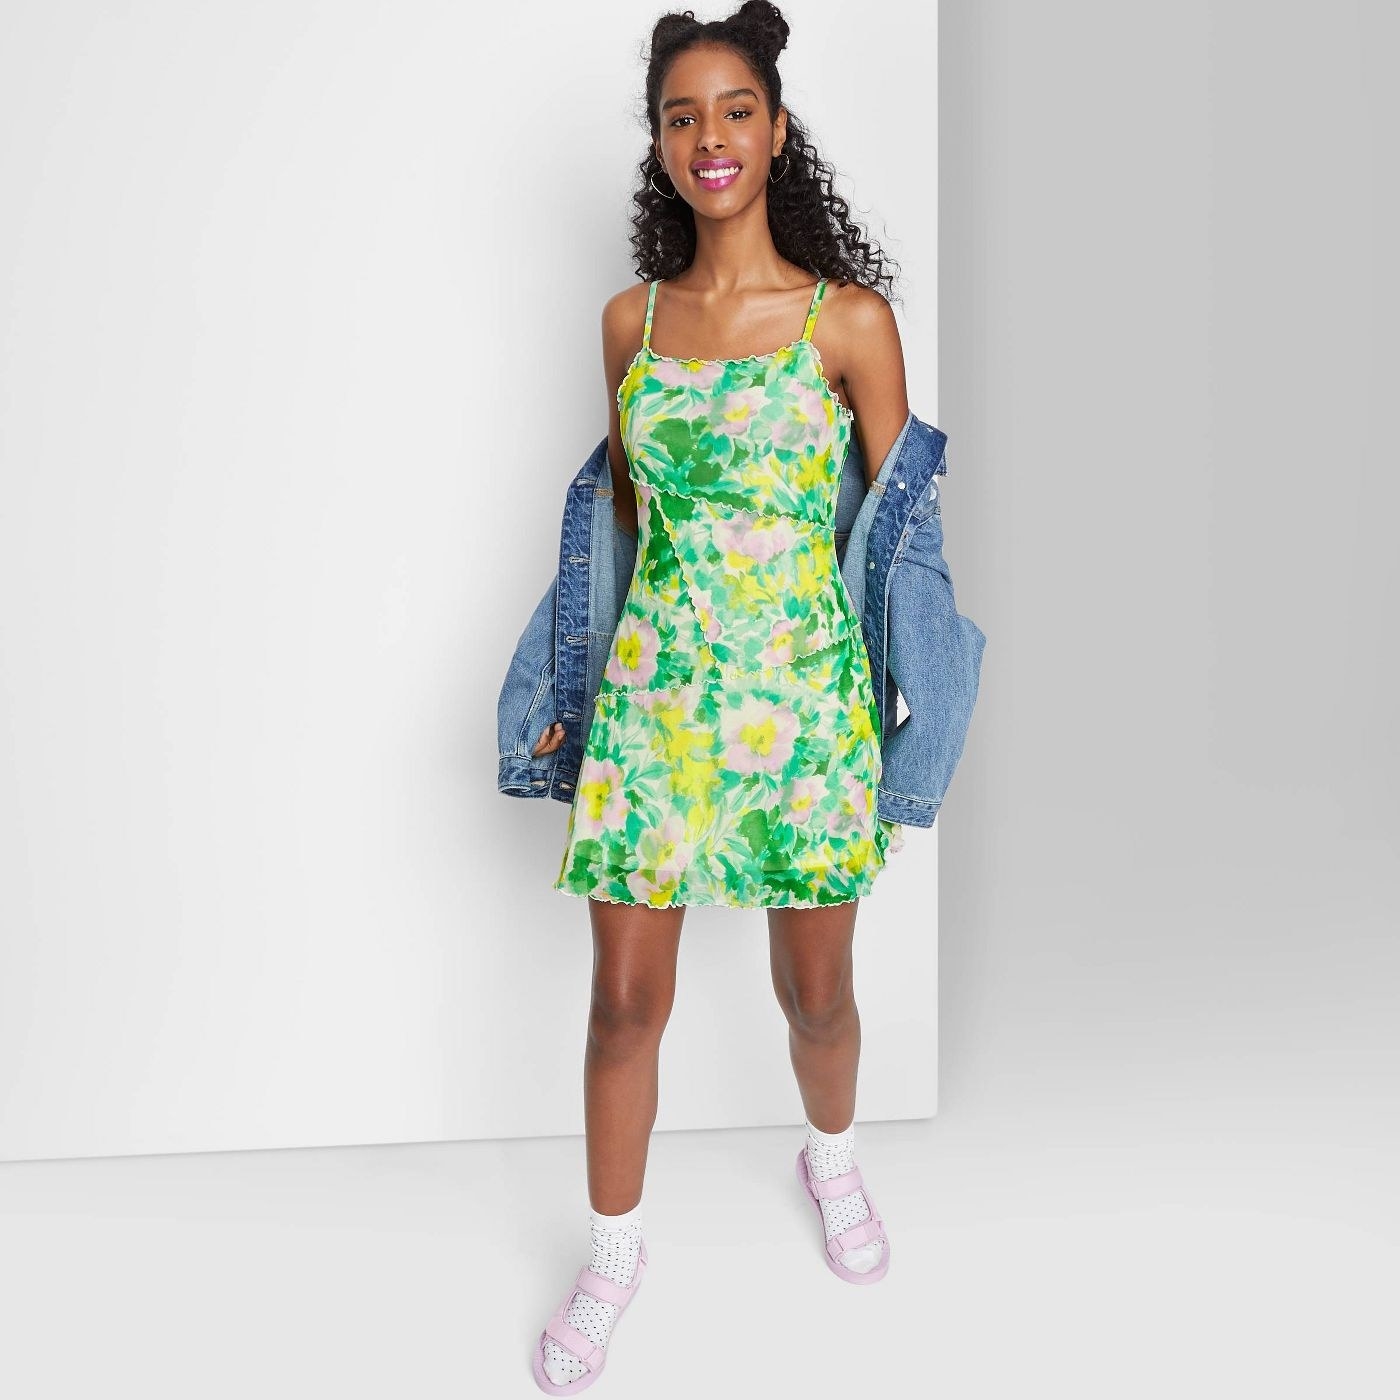 Model wearing green, yellow and pink dress with denim jacket and purple shoes and white socks